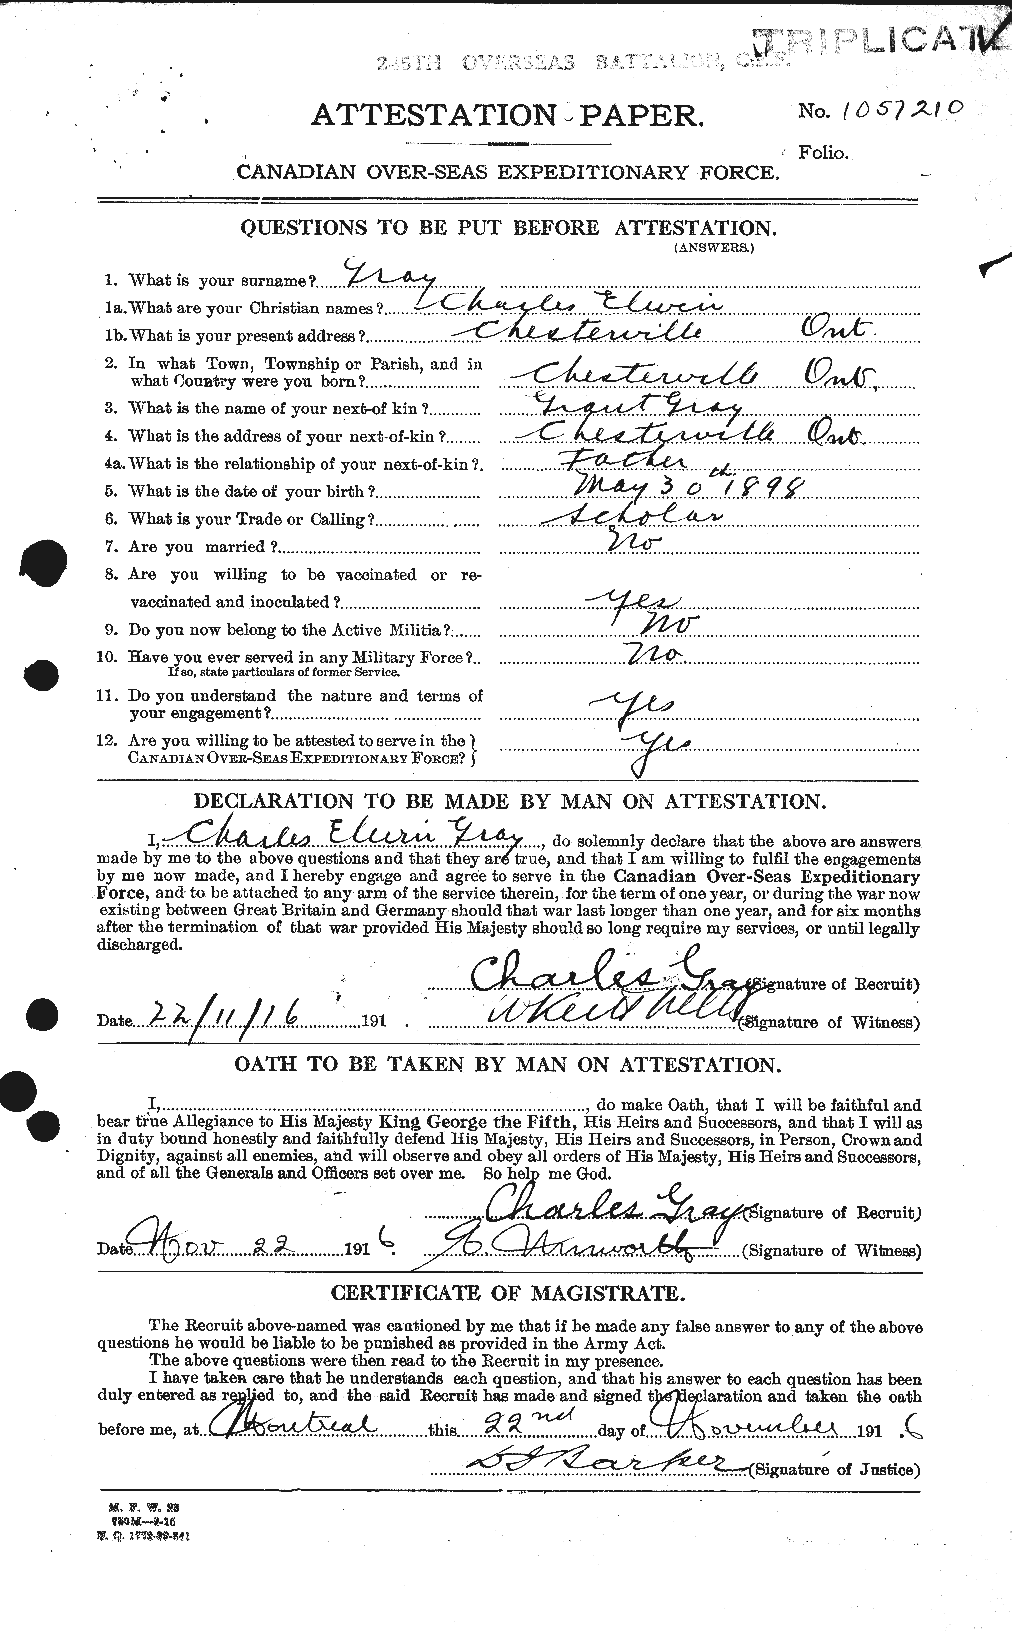 Personnel Records of the First World War - CEF 361434a